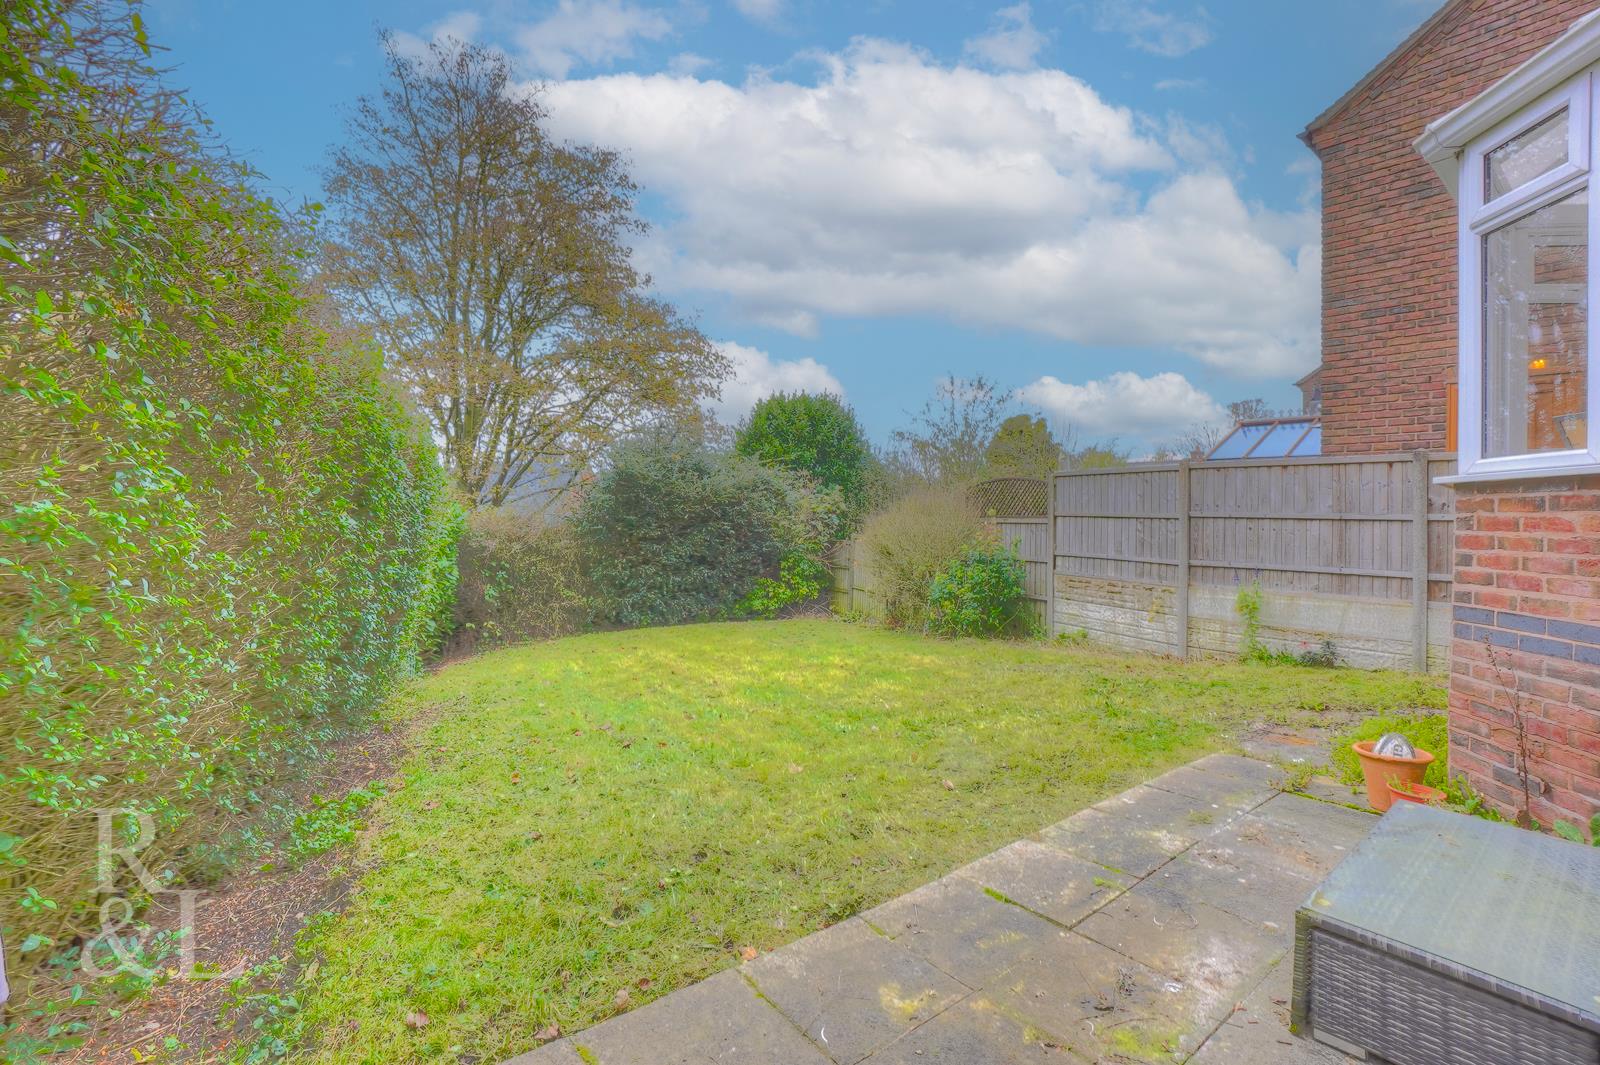 Property image for Canal Street, Oakthorpe